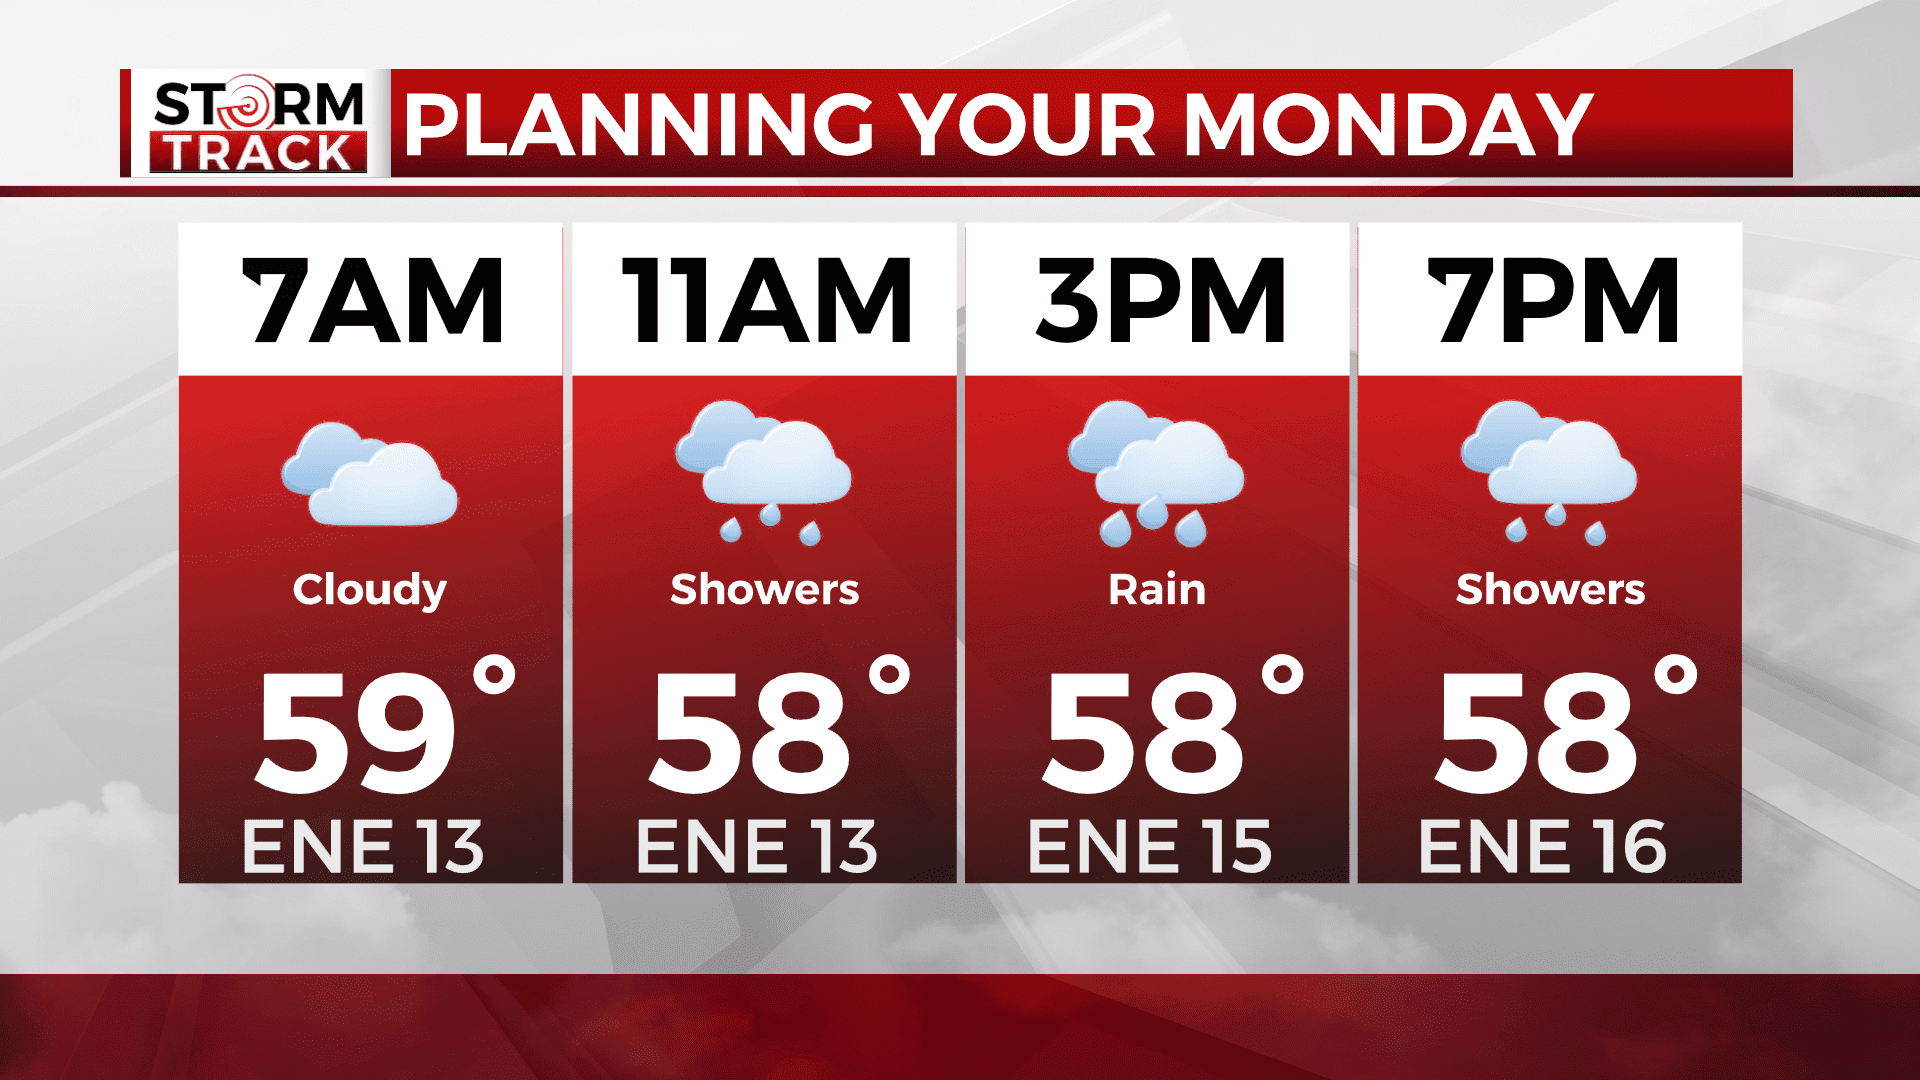 Monday's day planner